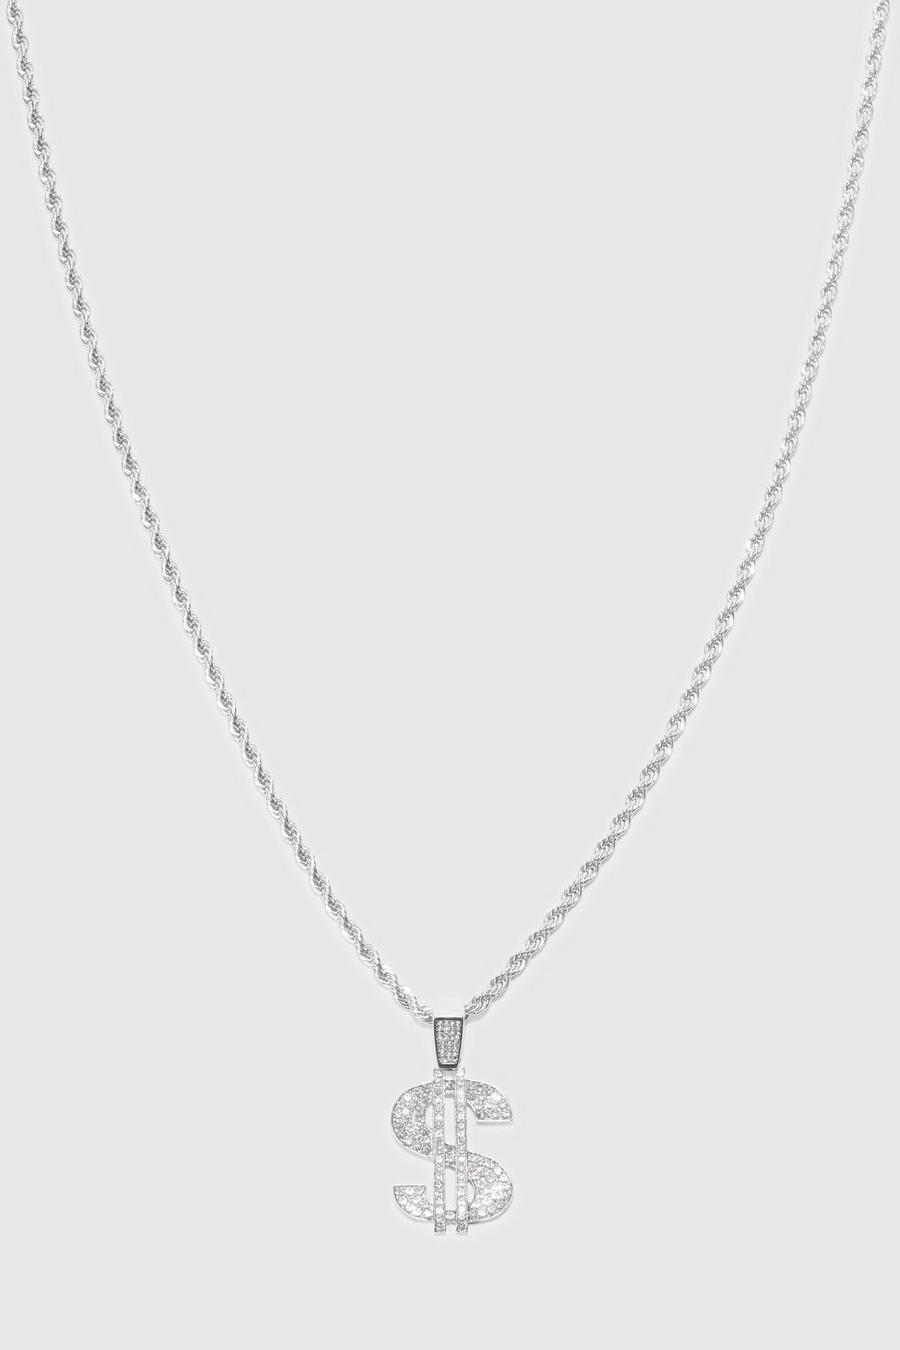 Silver argent Rope Chain Necklace With Iced Dollar